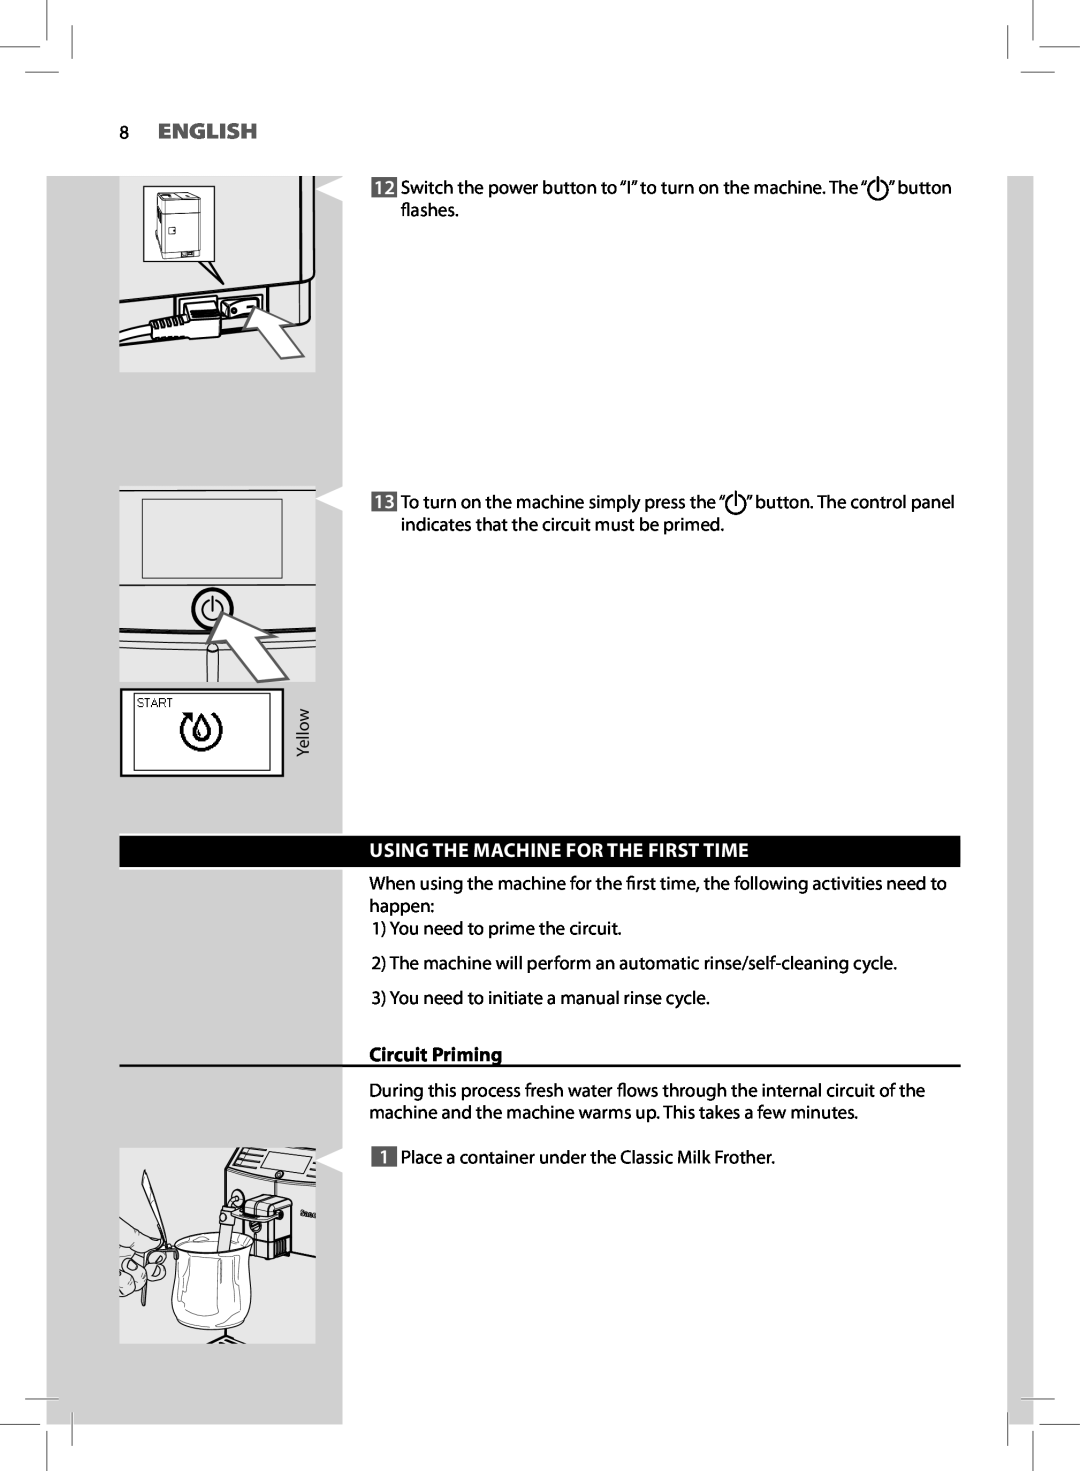 Saeco Coffee Makers HD8775 user manual 8ENGLISH, Using The Machine For The First Time, Circuit Priming 